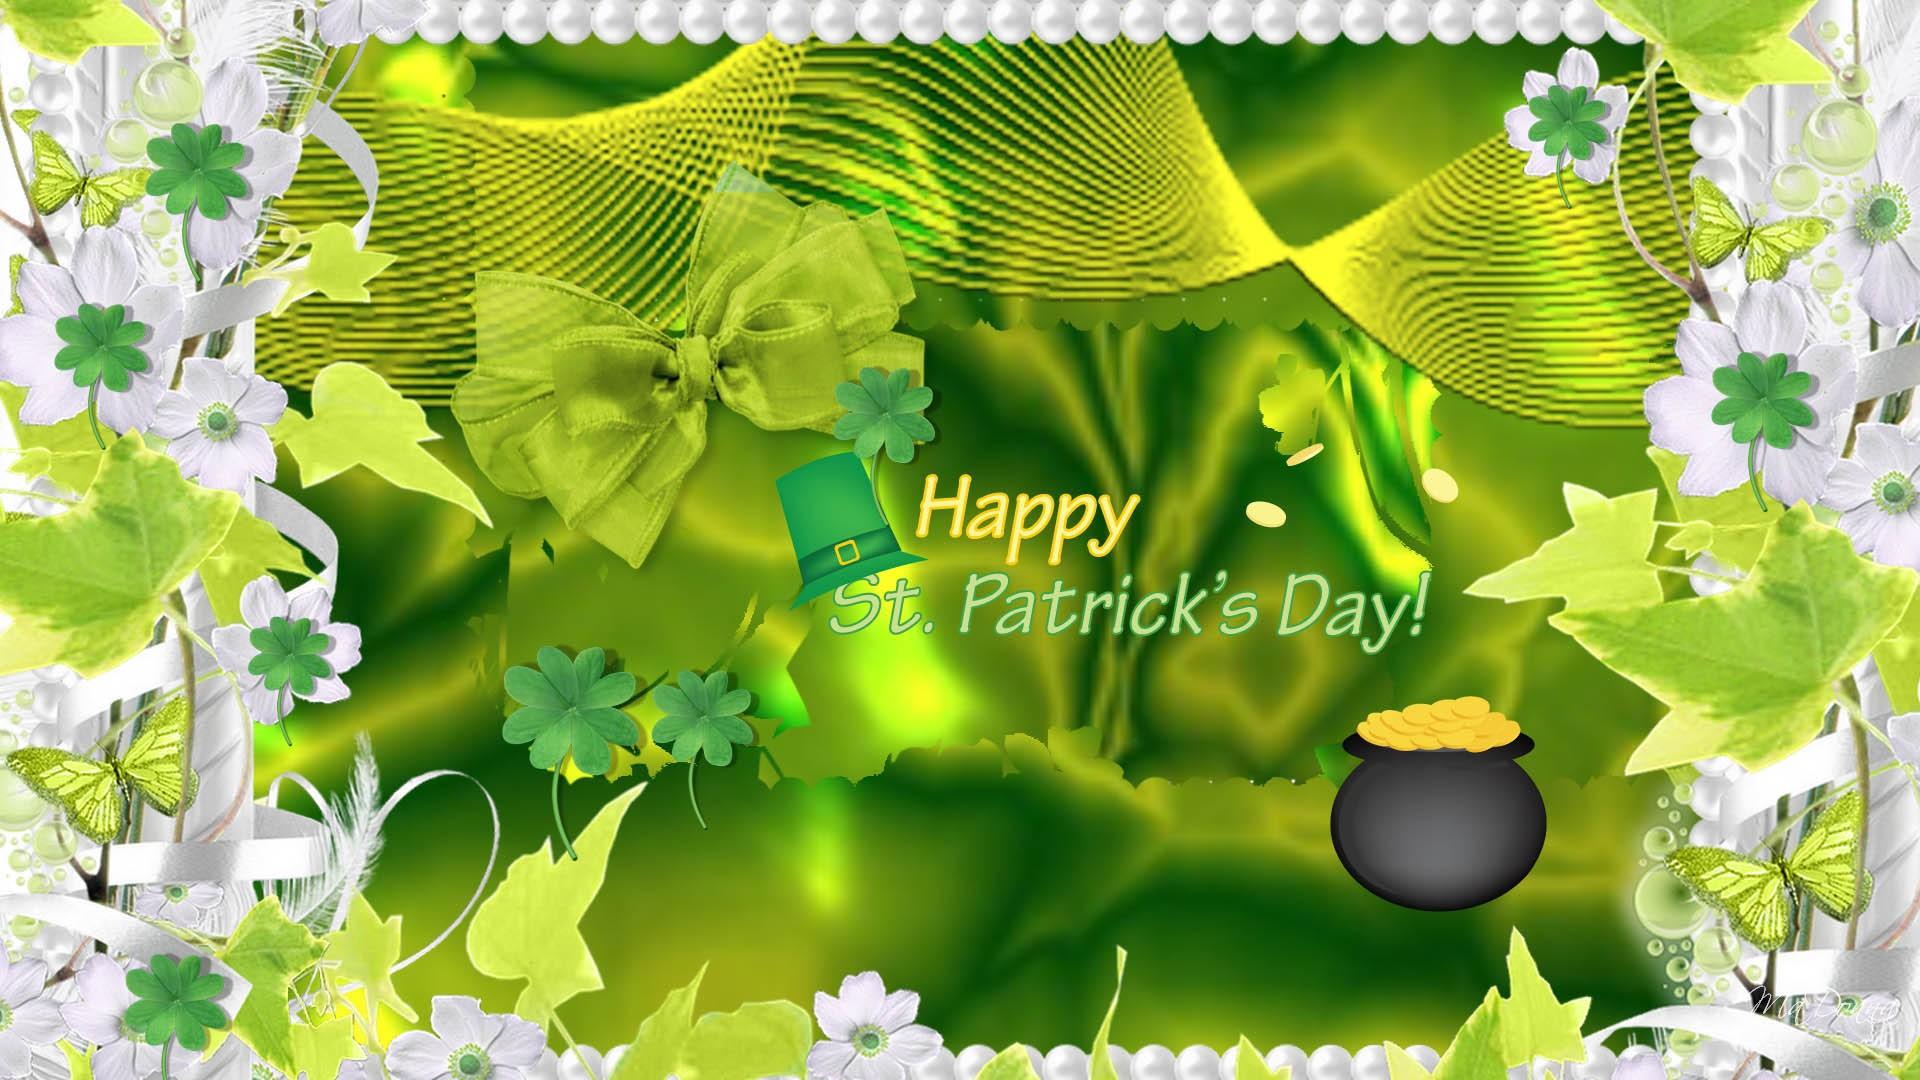 st patrick's day, holiday